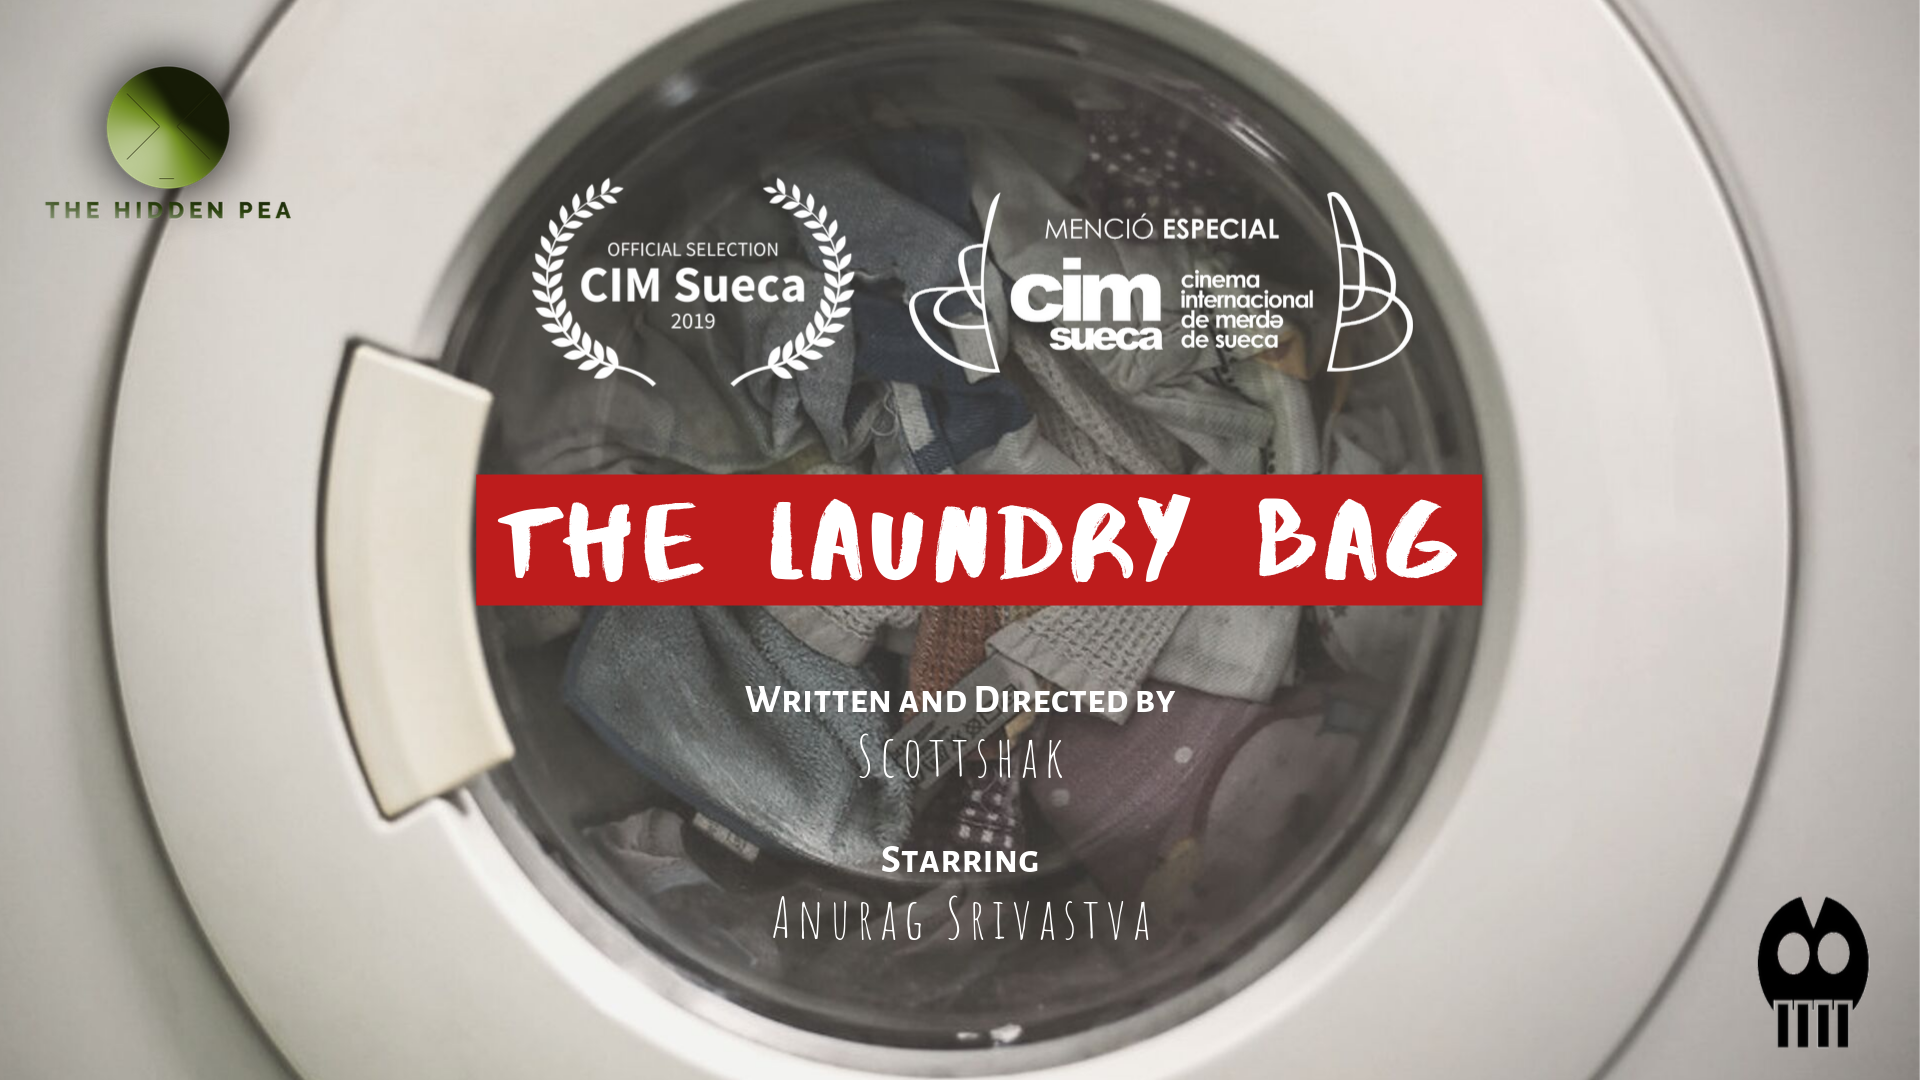 The Laundry Bag cim special mention